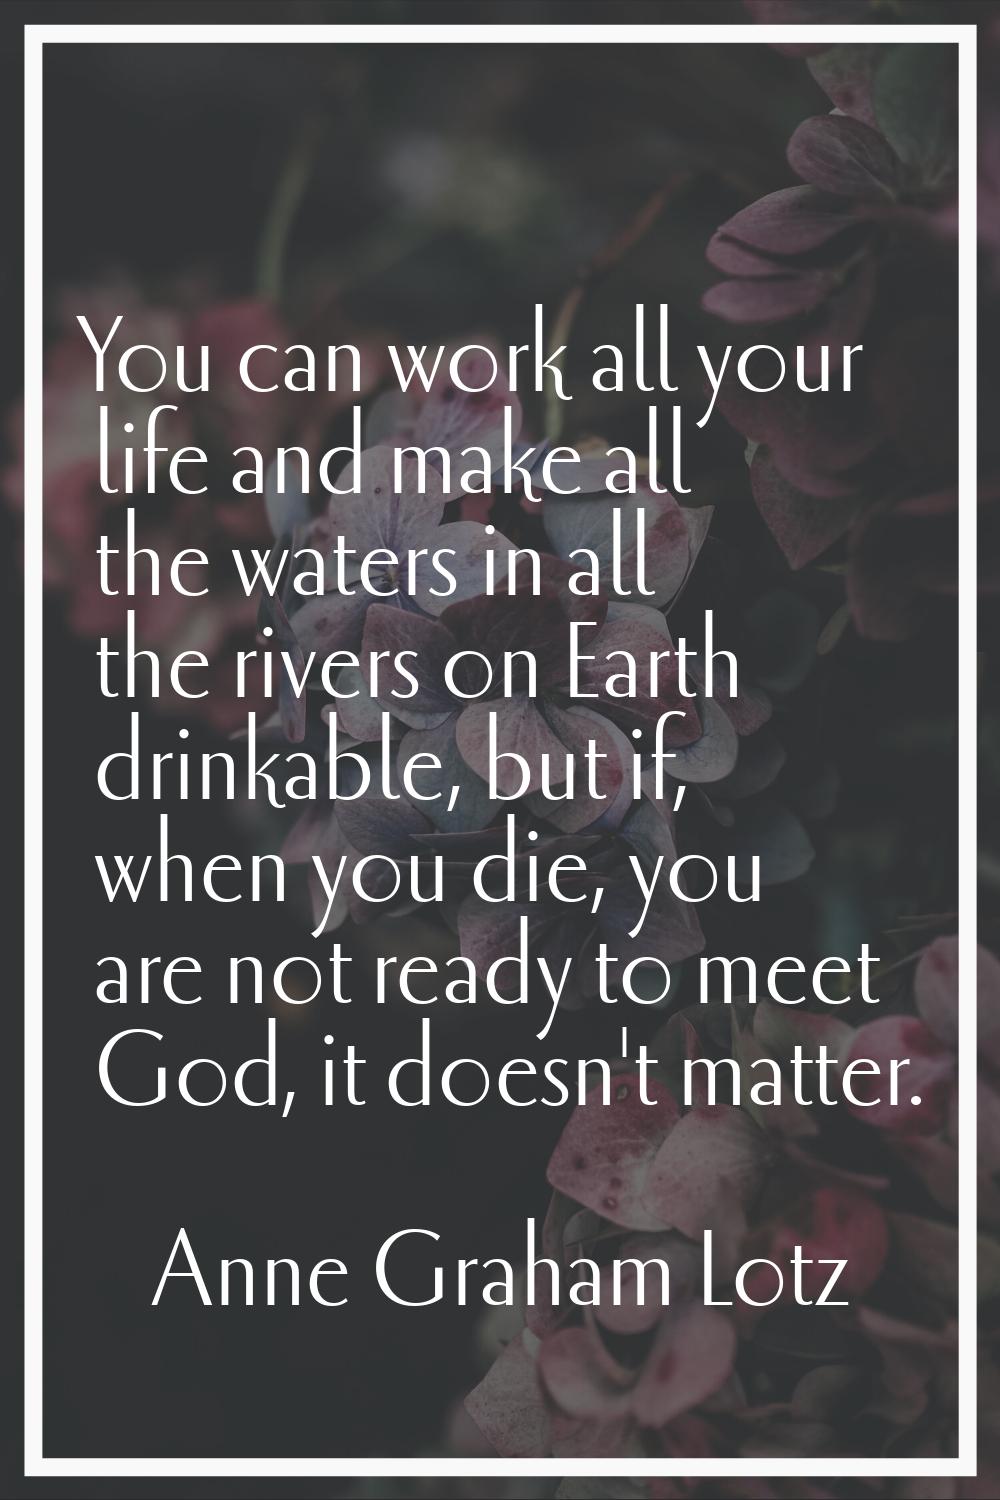 You can work all your life and make all the waters in all the rivers on Earth drinkable, but if, wh